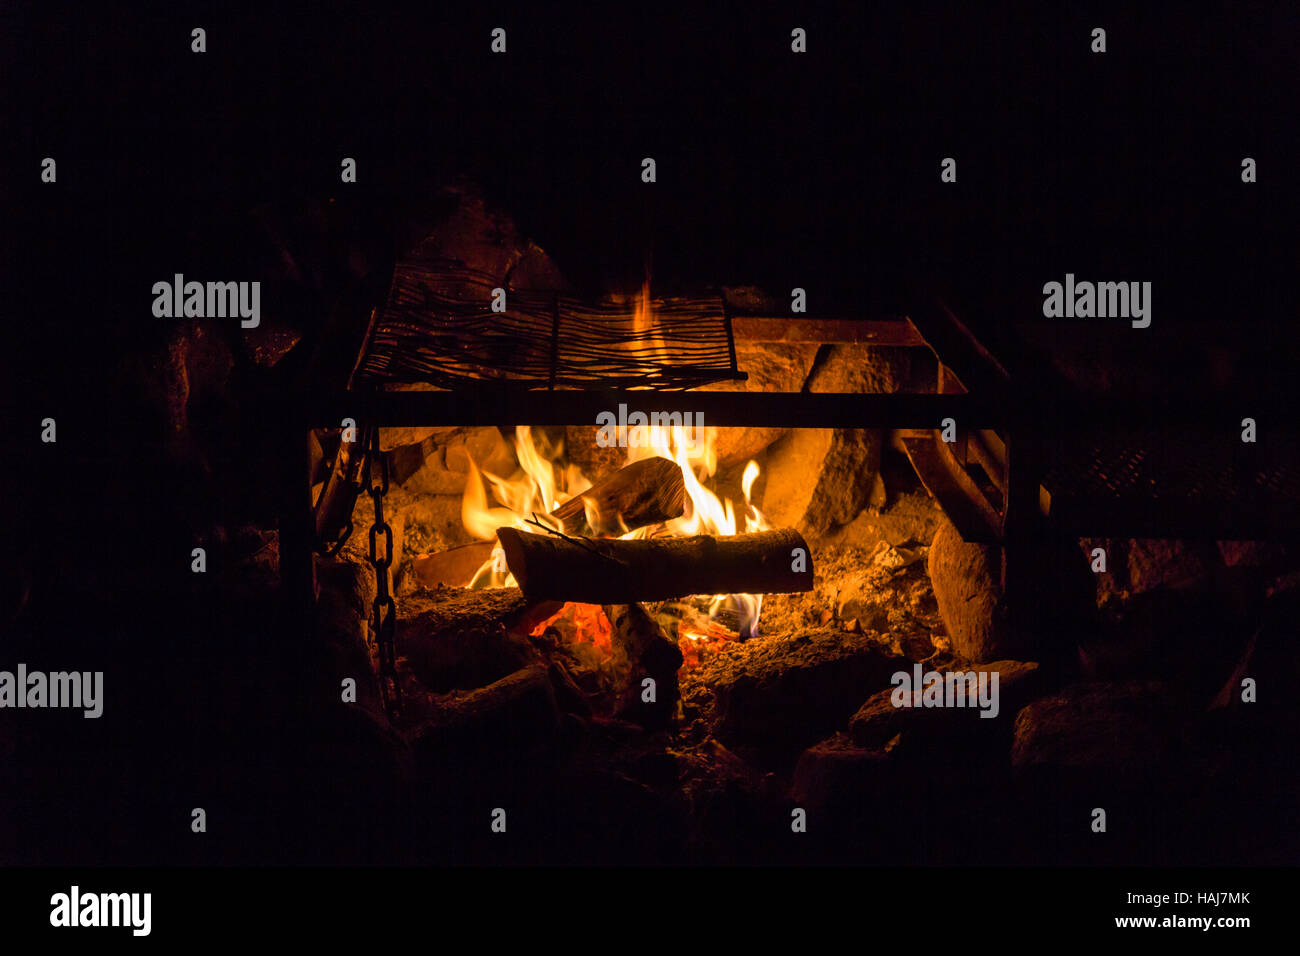 Camping outdoors lighting a campfire for warmth Stock Photo